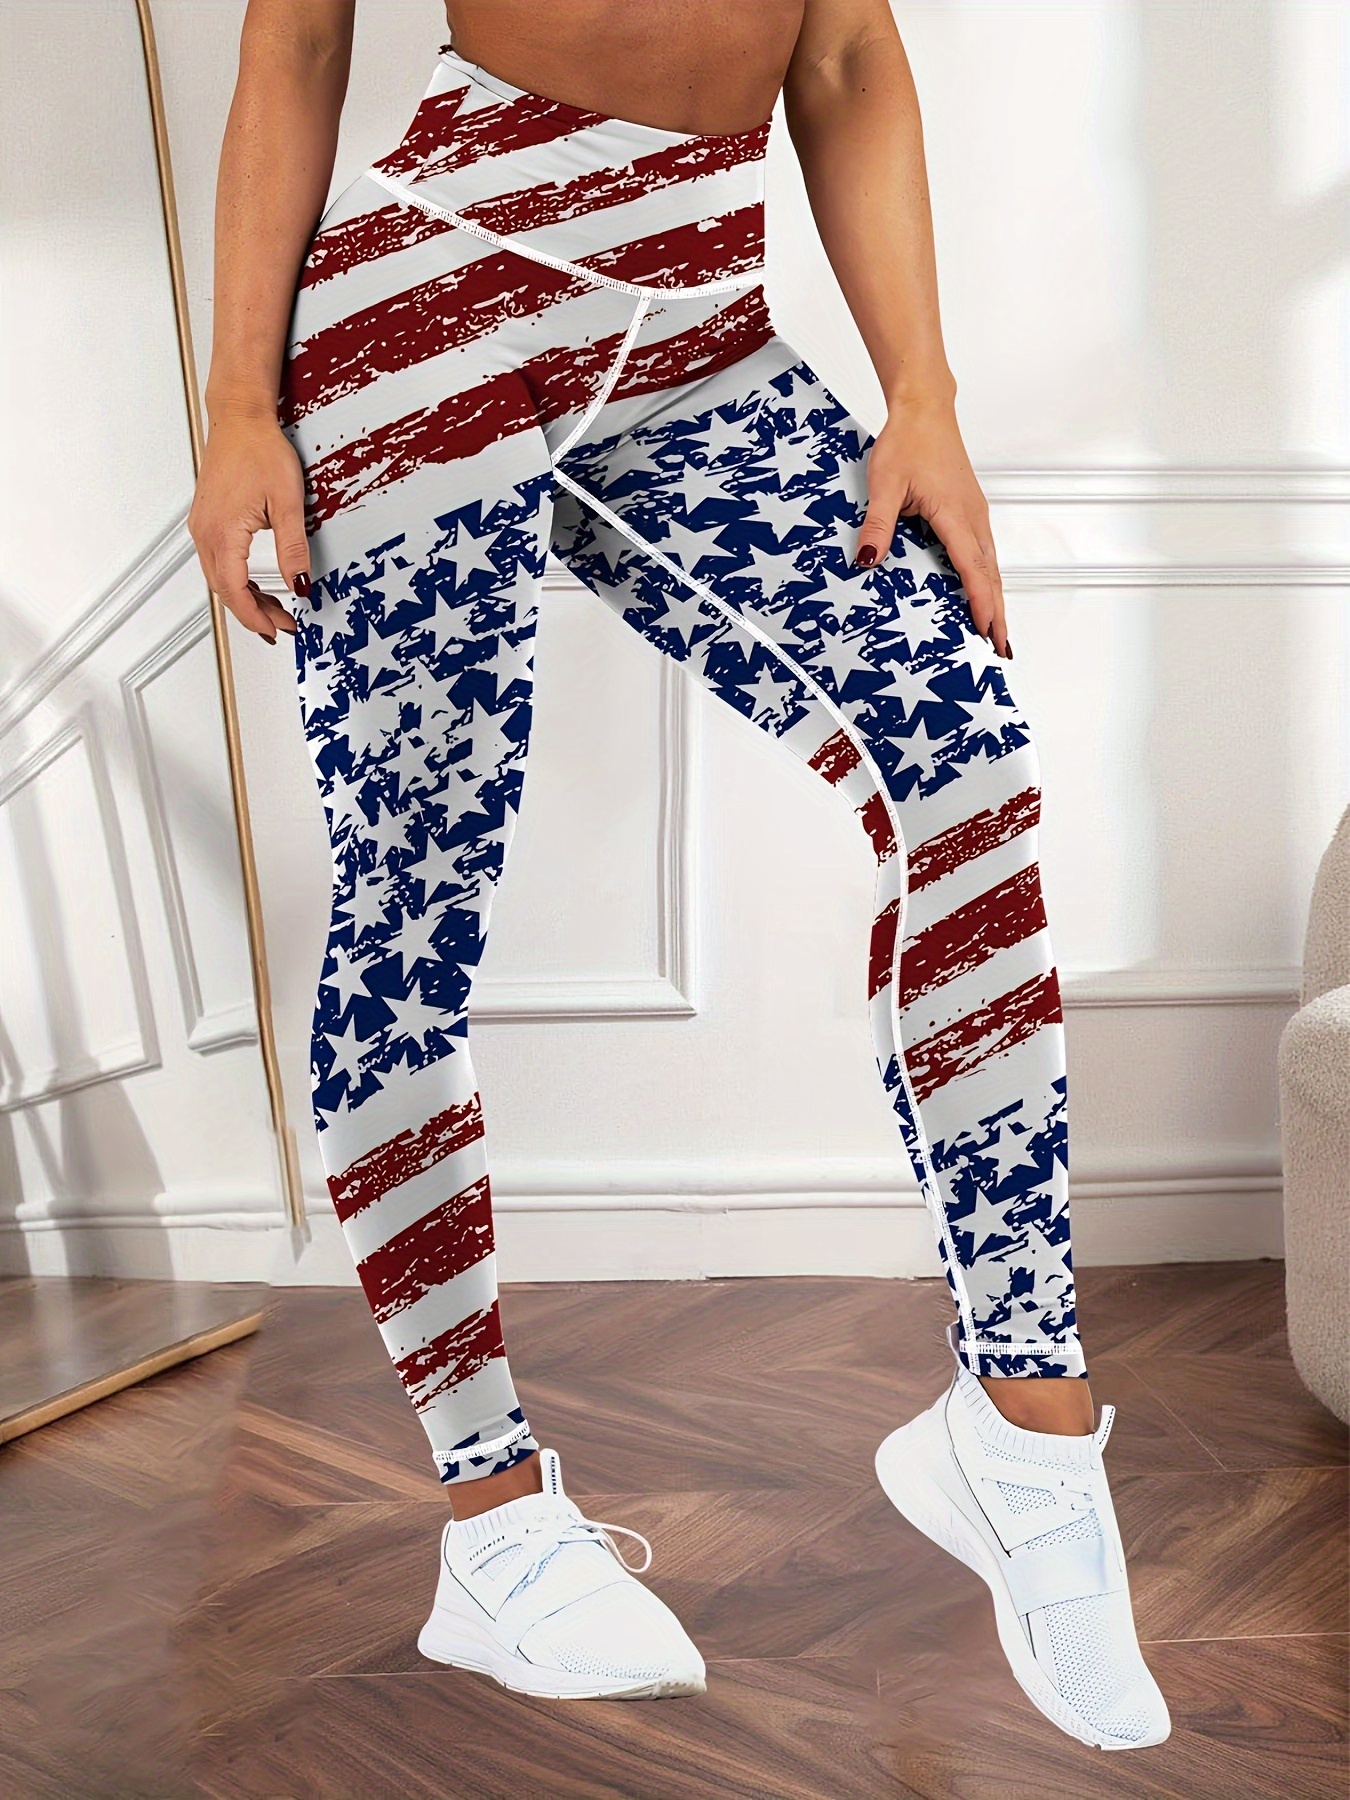 President's Day American Flag Workout Yoga Pants, Stretchy Fitness Training  Sports Leggings, Women's Activewear